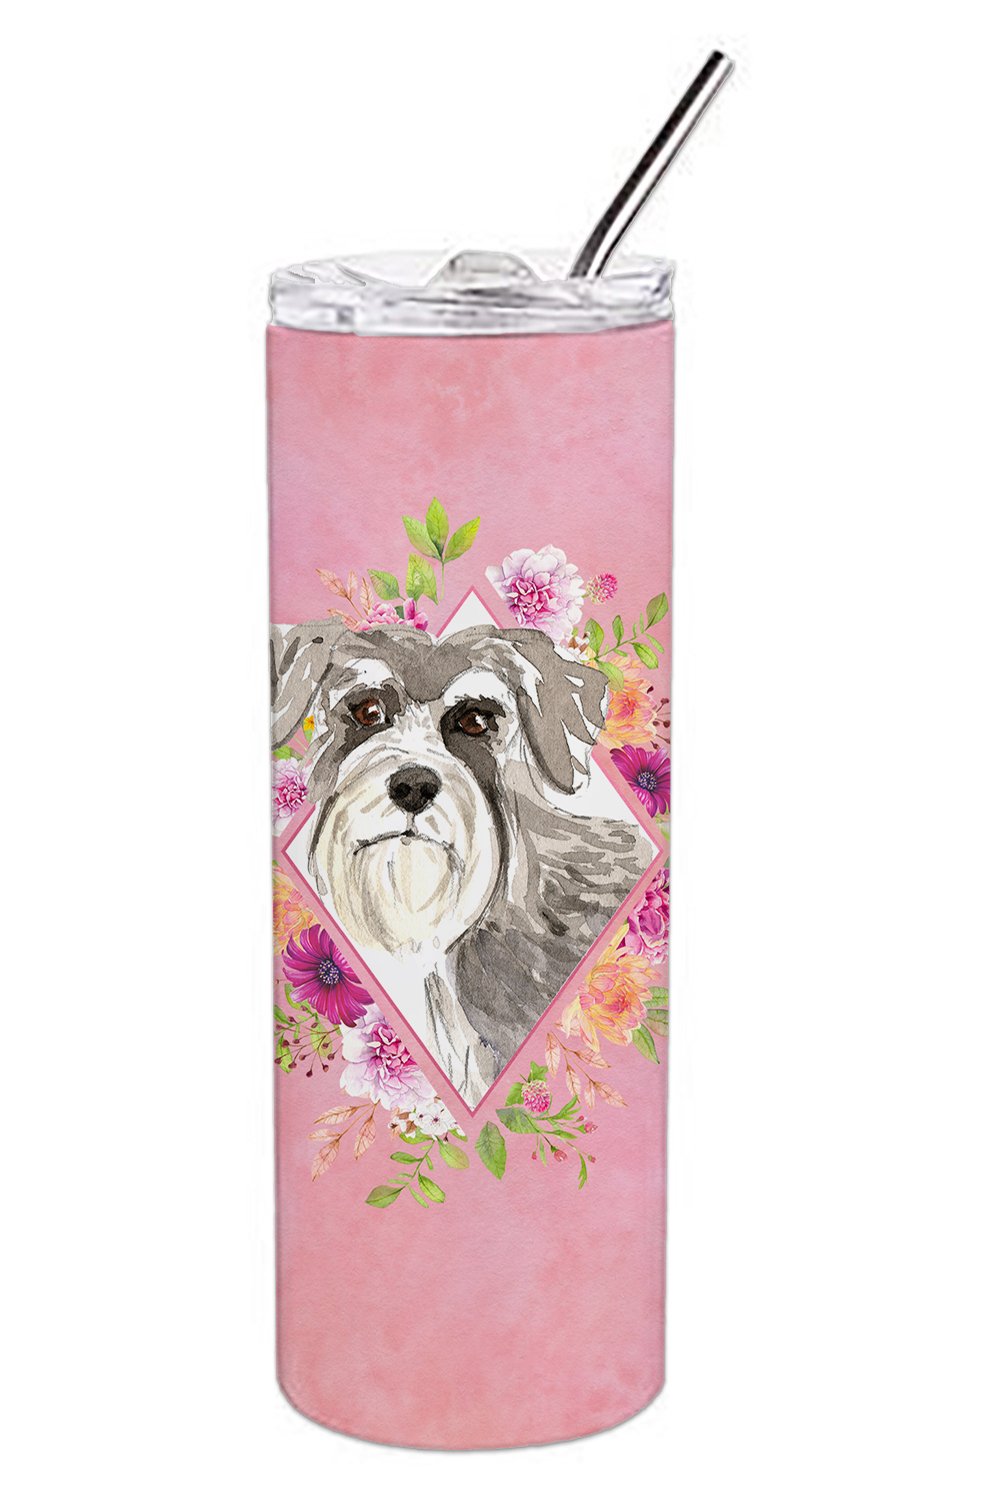 Schnauzer #1 Pink Flowers Double Walled Stainless Steel 20 oz Skinny Tumbler CK4215TBL20 by Caroline's Treasures